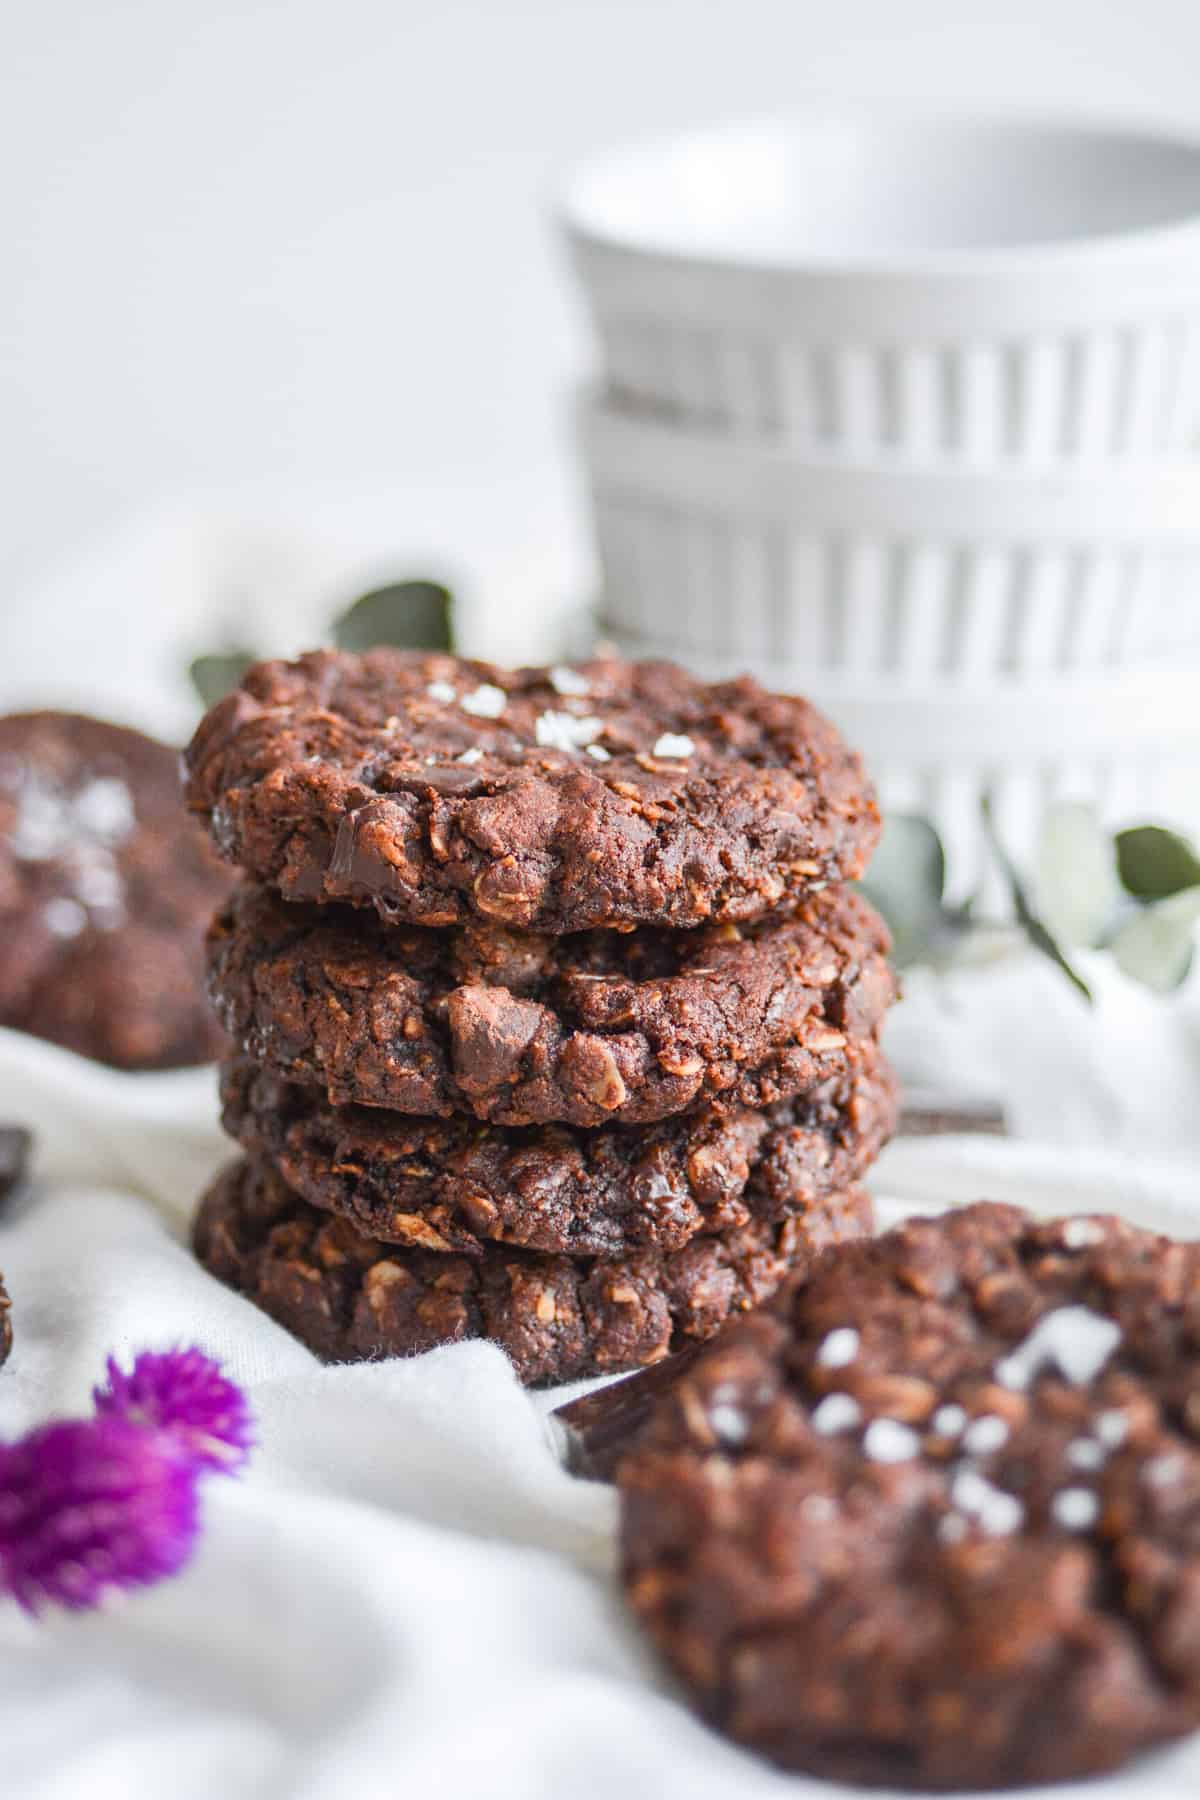 A stack of four Vegan Chocolate Oatmeal Cookies on a white cloth.